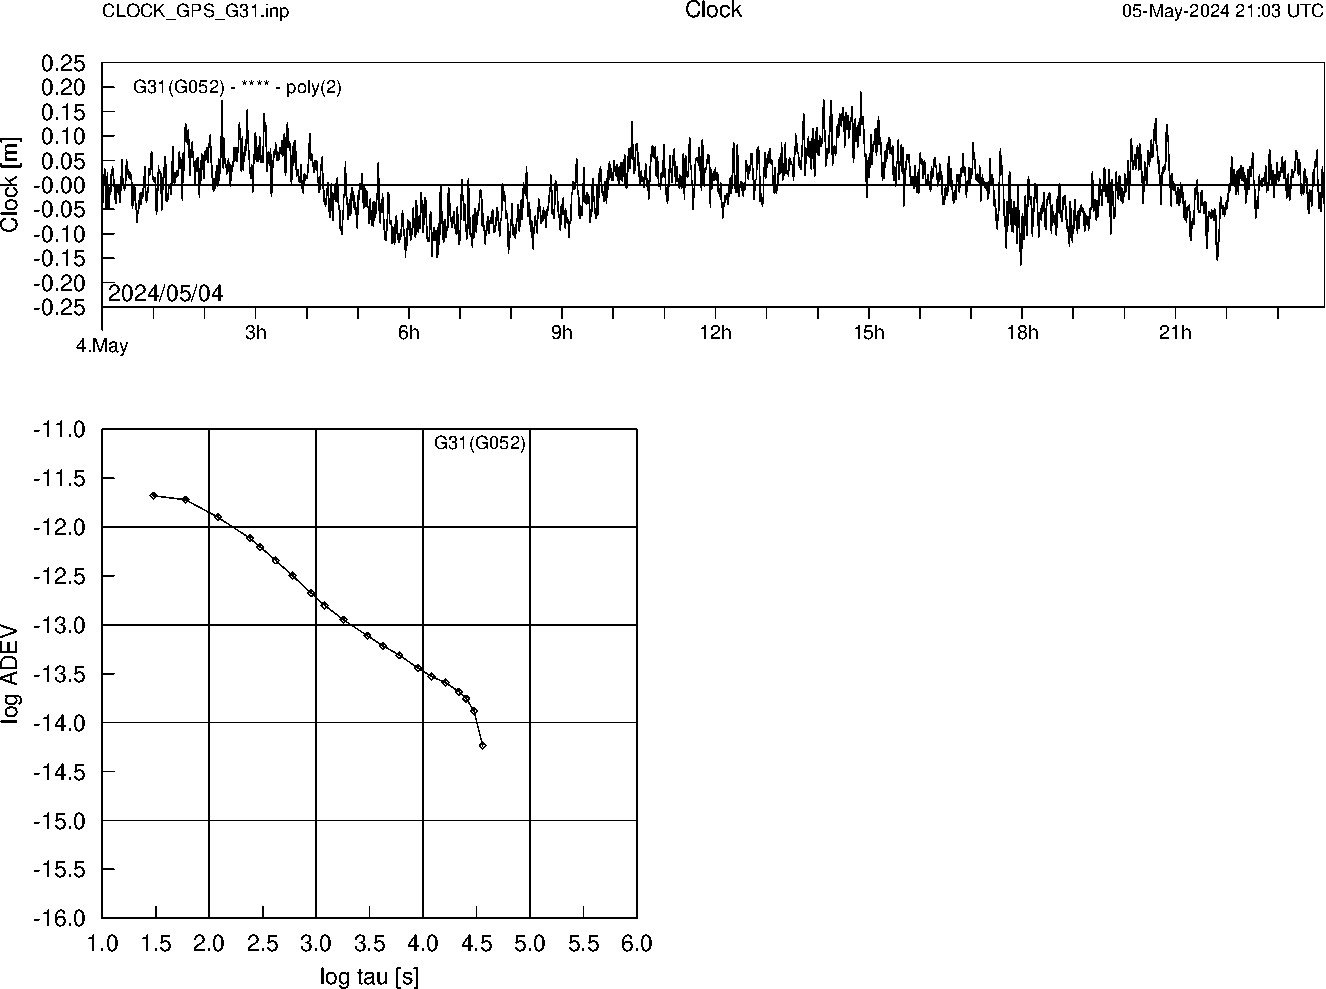 GPS G31 Clock Time Series and Allan Deviation